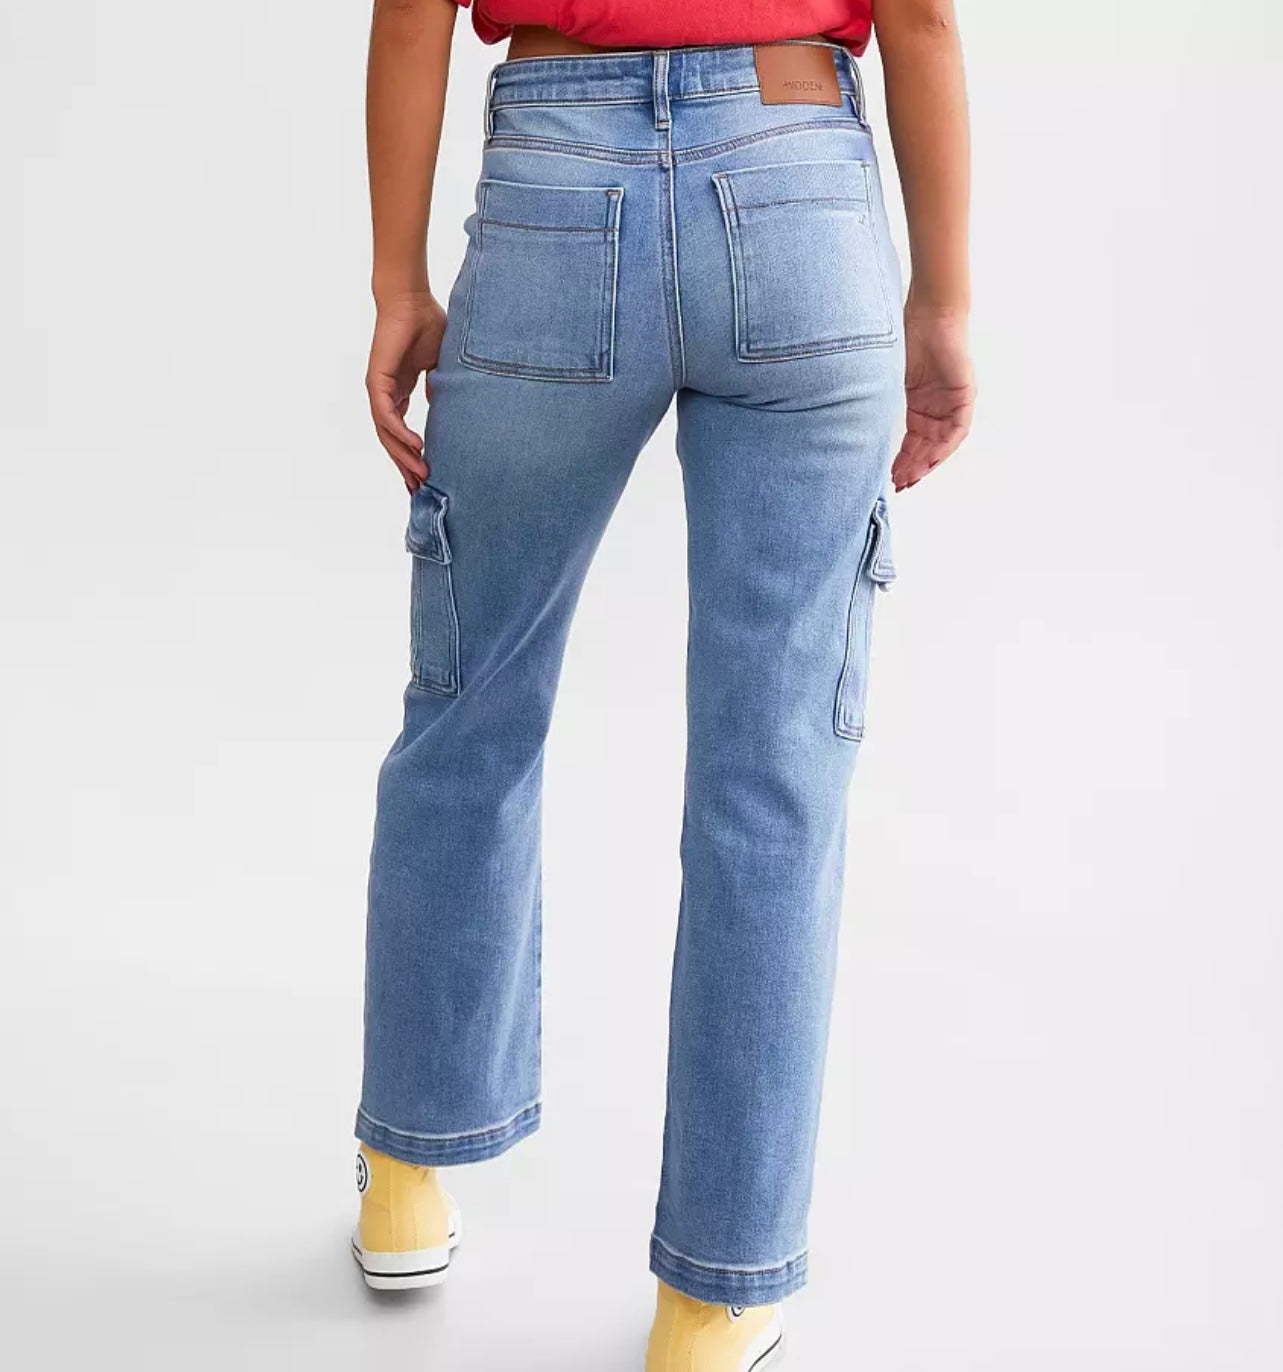 The Tracey cropped Cargo